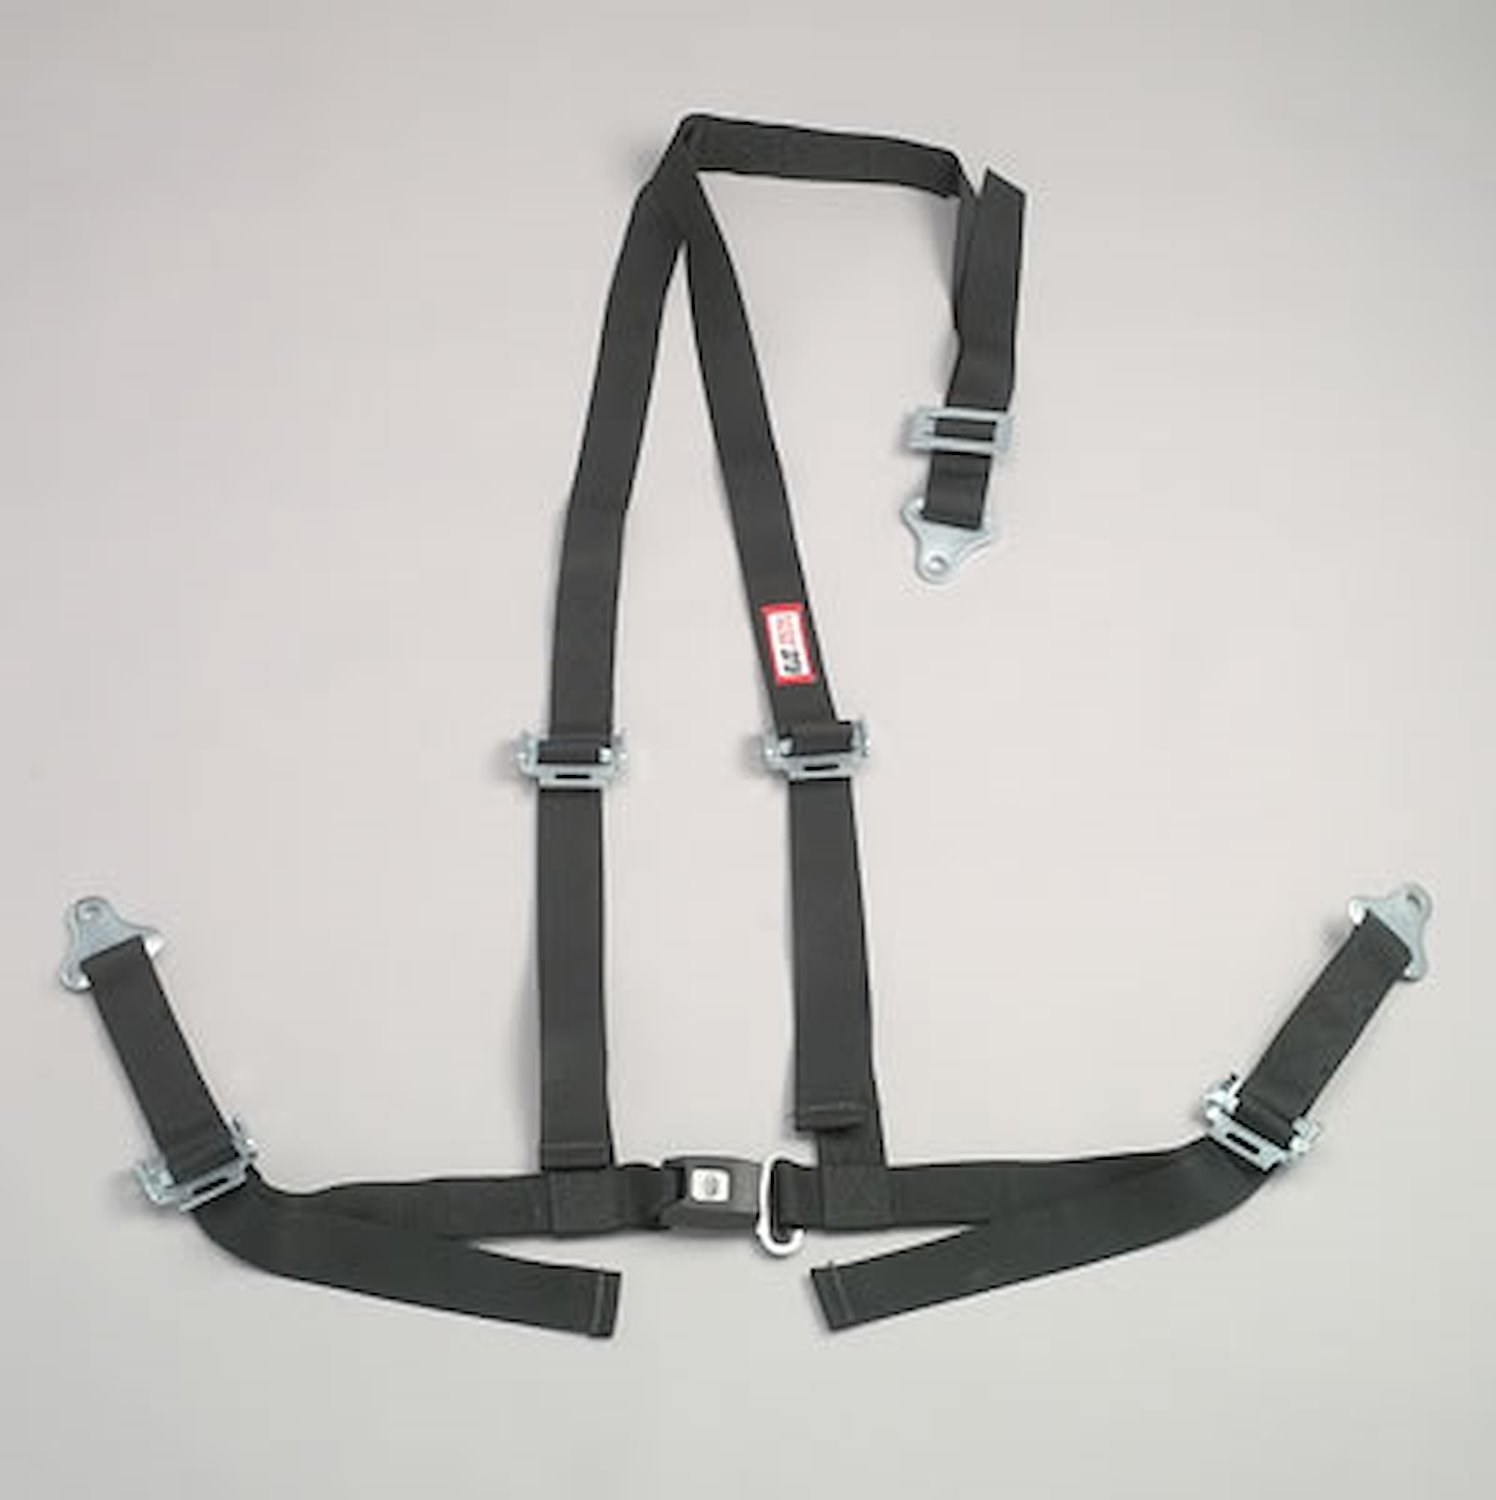 NON-SFI B&T HARNESS 2 PULL UP Lap Belt SNAP 2 S. H. Individual ROLL BAR Mount WRAP/BOLT w/STERNUM STRAP GRAY